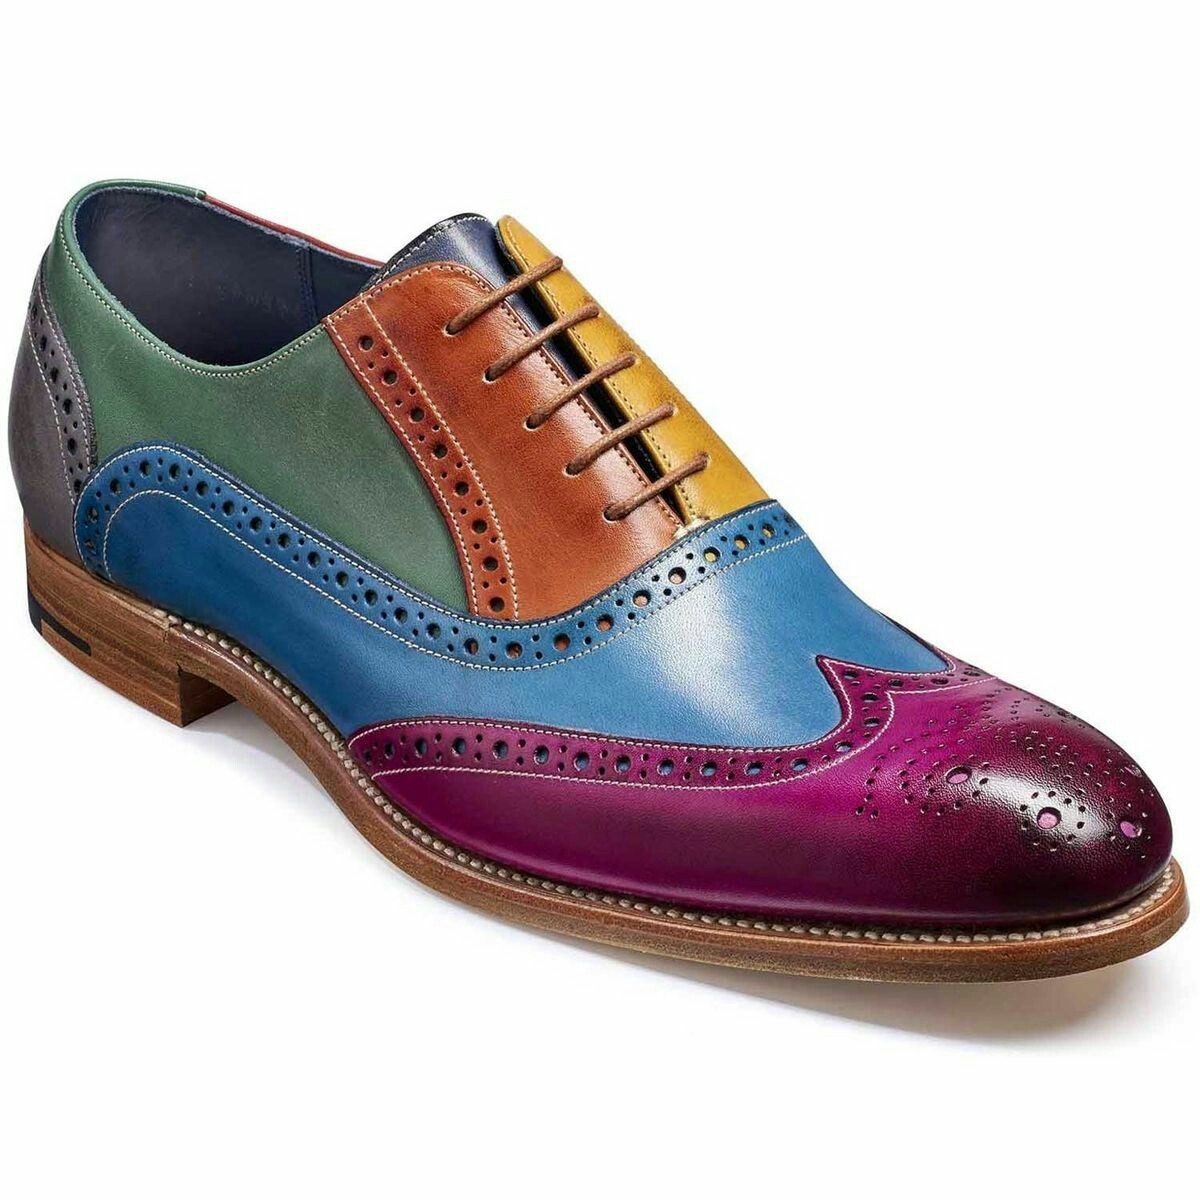 Handcrafted Leather Multi Color Wing Tip Burnished Brogues Toe Party Wear Shoes